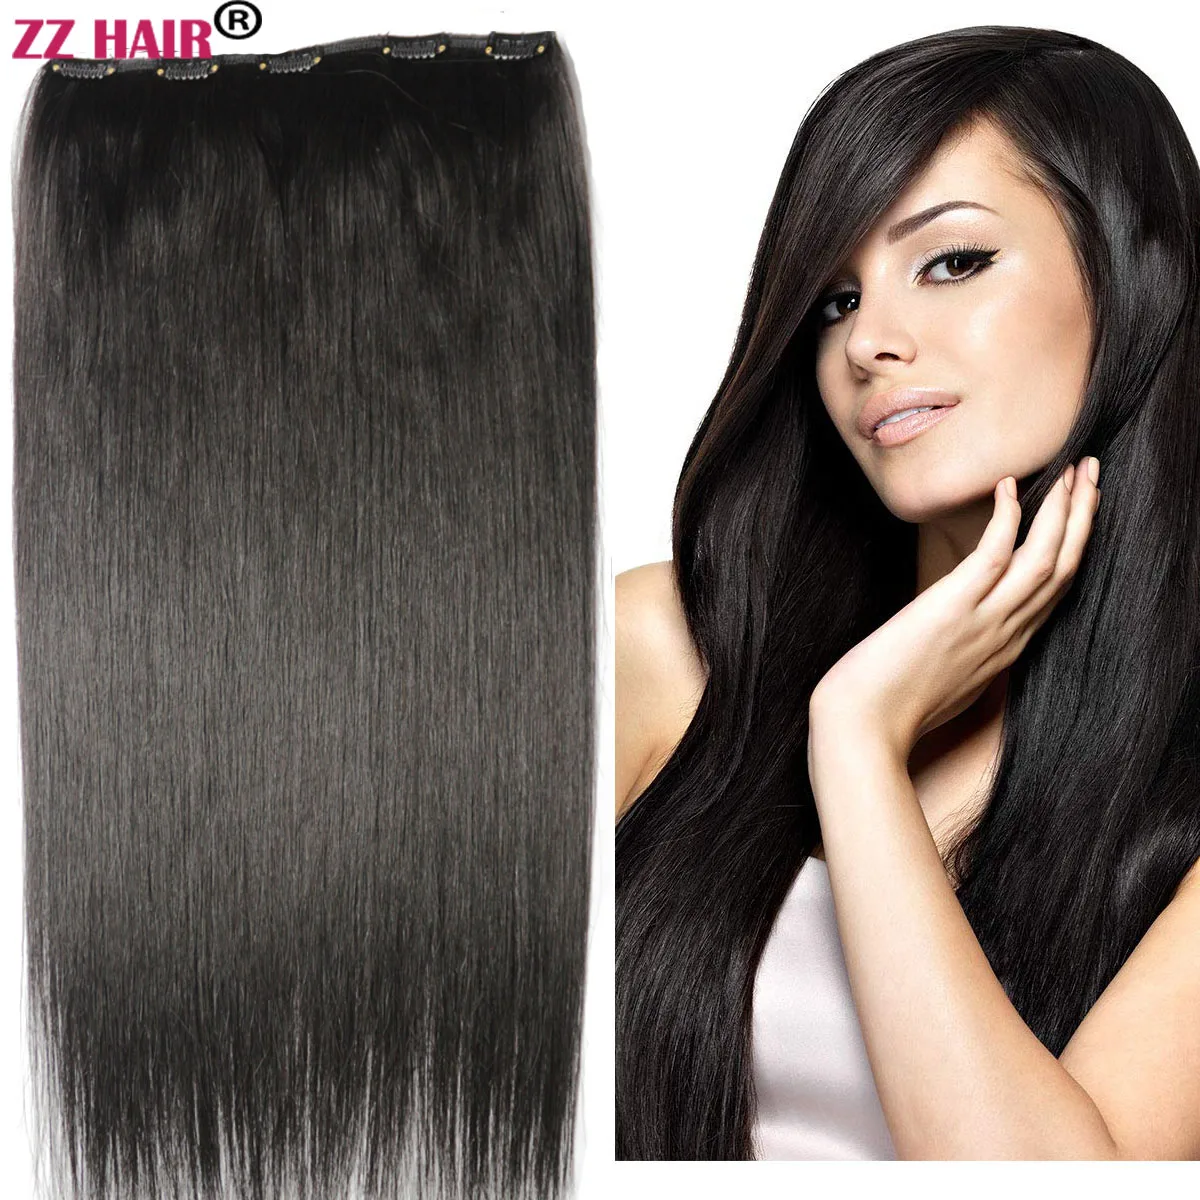 

ZZHAIR Clips In100% Brazilian Human Remy Hair Extensions 16"-30" 5 Clips 1pcs Set No-lace 200g-220g One Piece Natural Straight